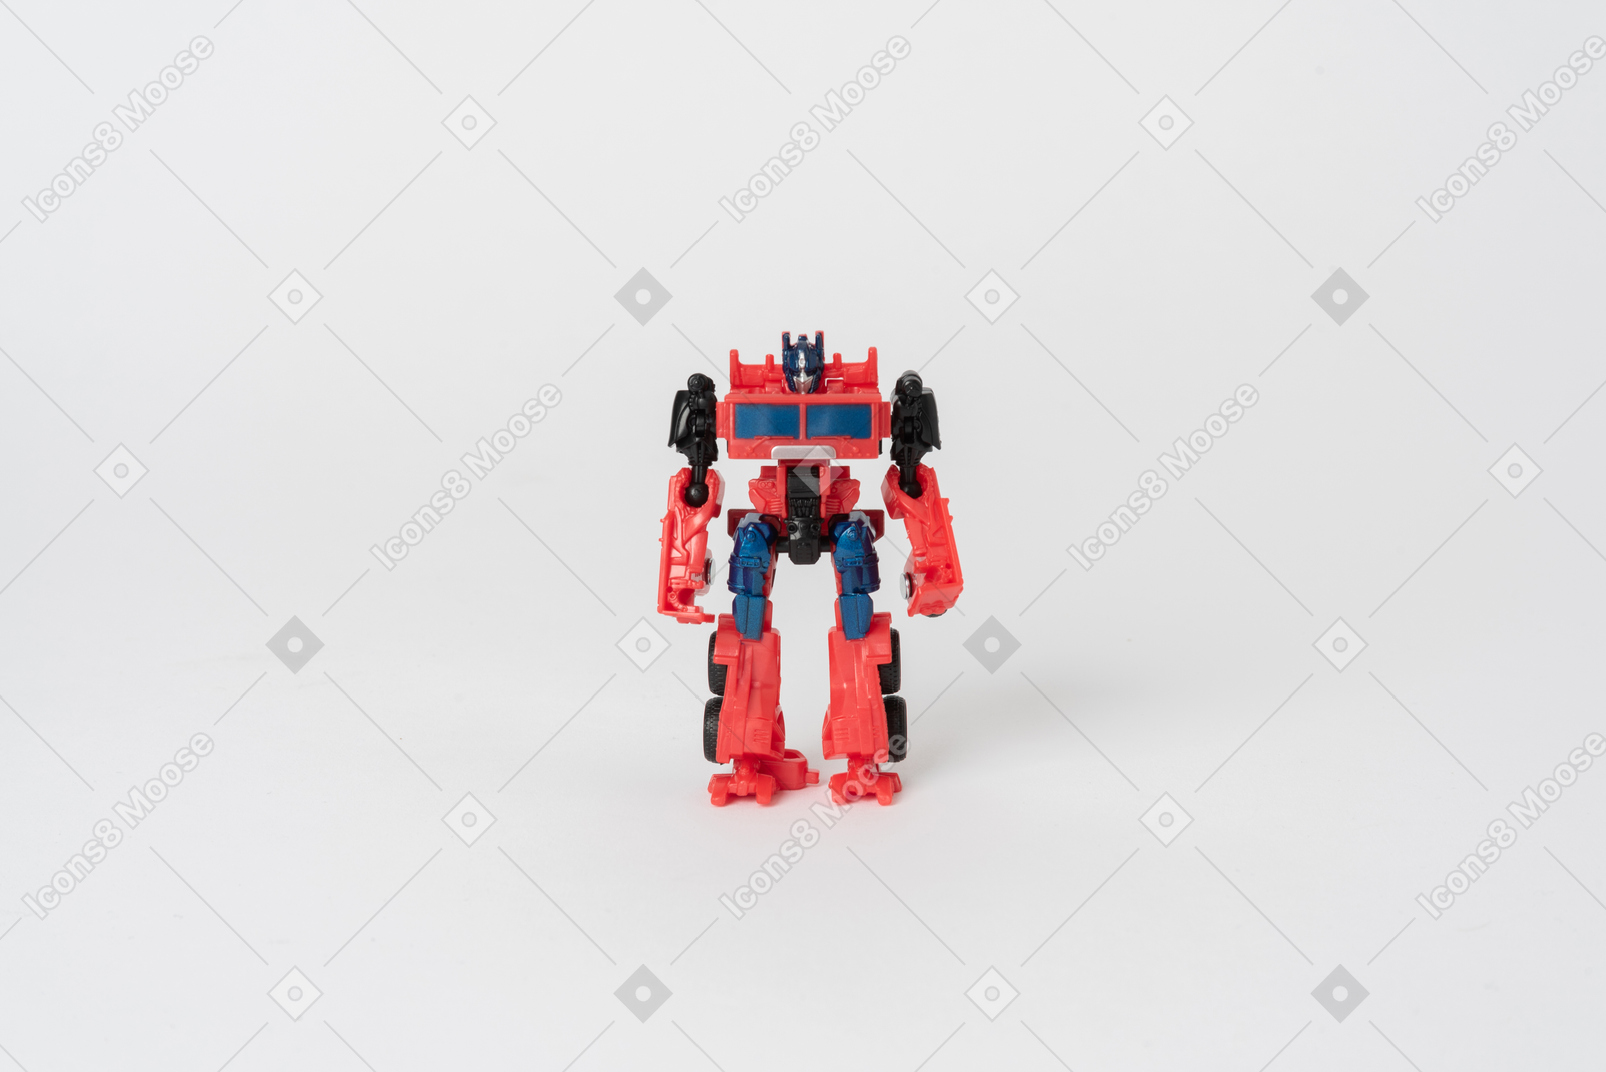 A toy transformer figure of red and black colours standing against a plain white background